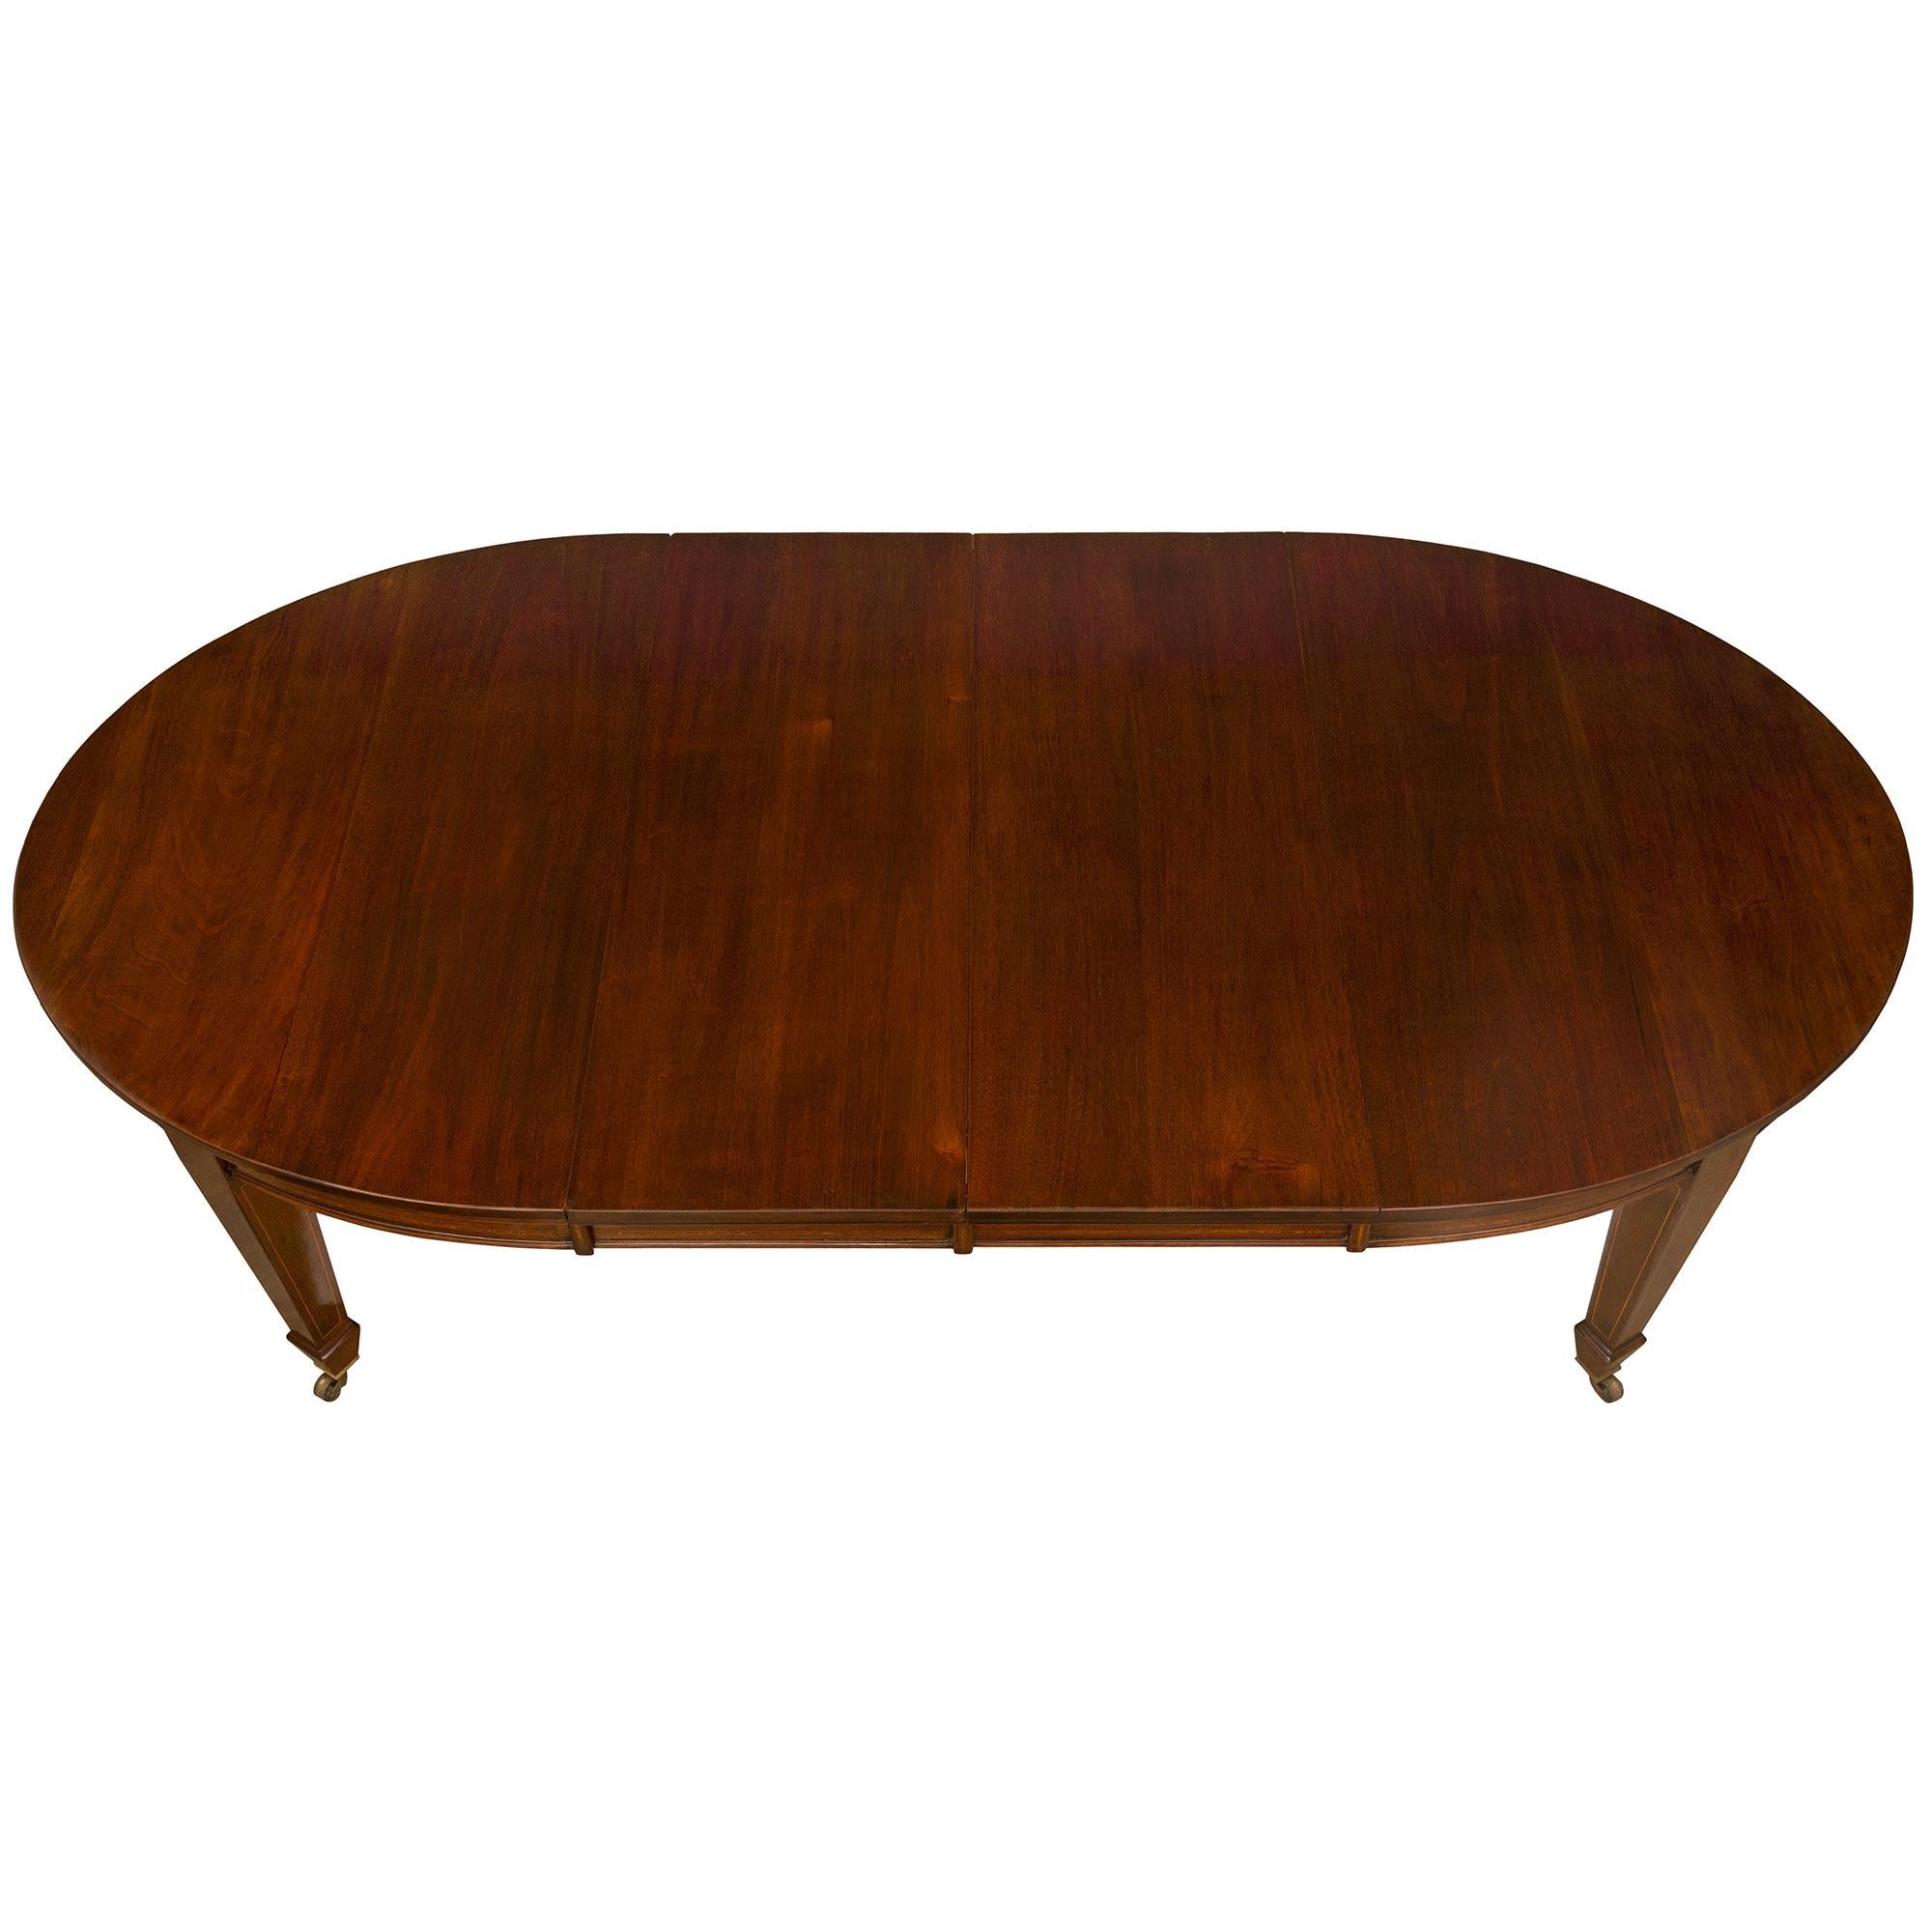 English 19th Century Regency Mahogany Dining Table In Good Condition For Sale In West Palm Beach, FL